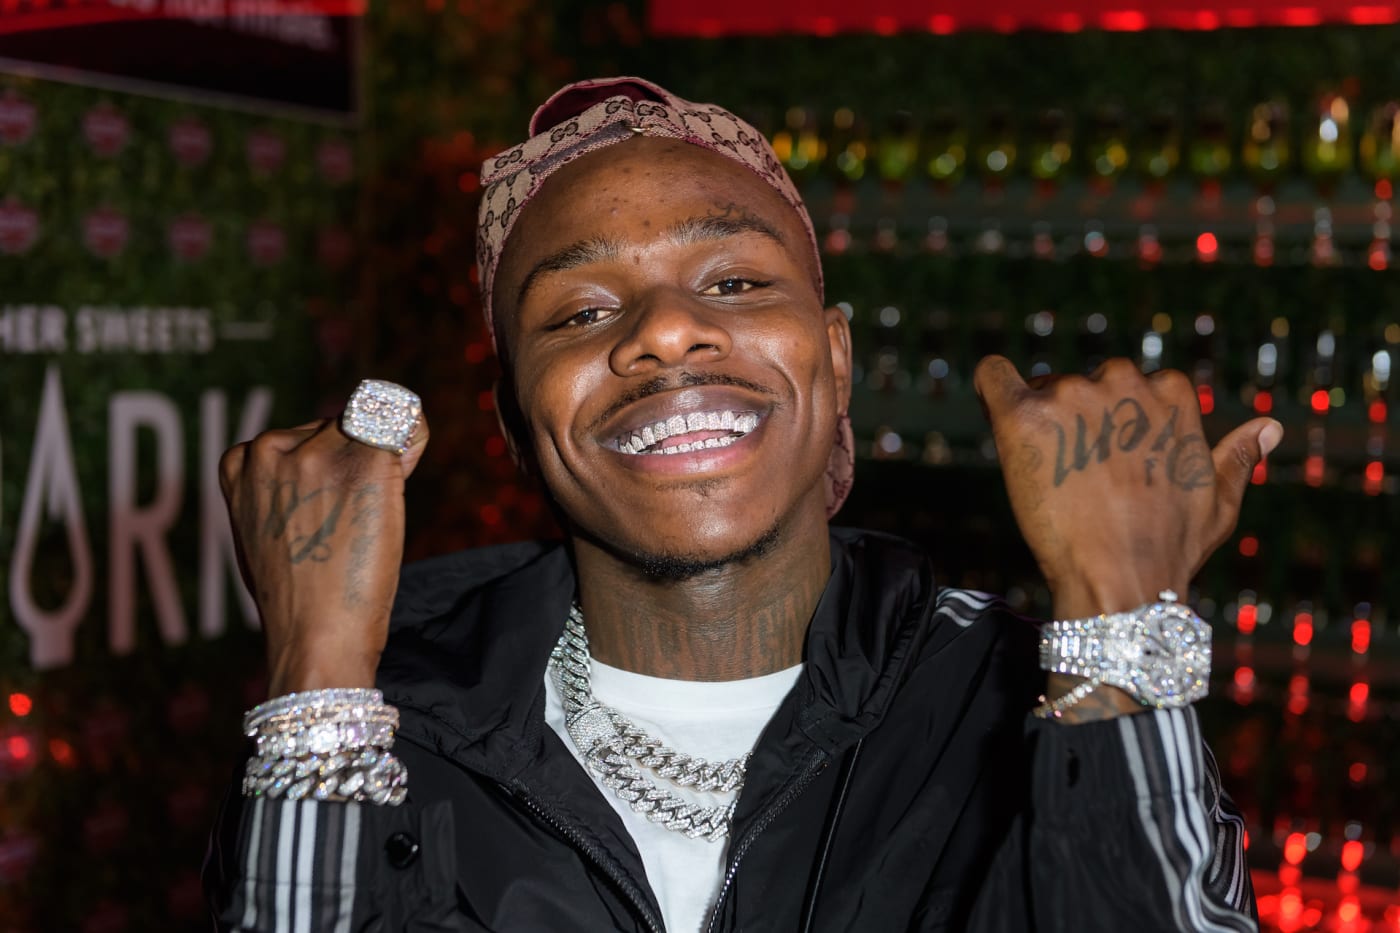 DaBaby attends the Swisher Sweets Spark Party.